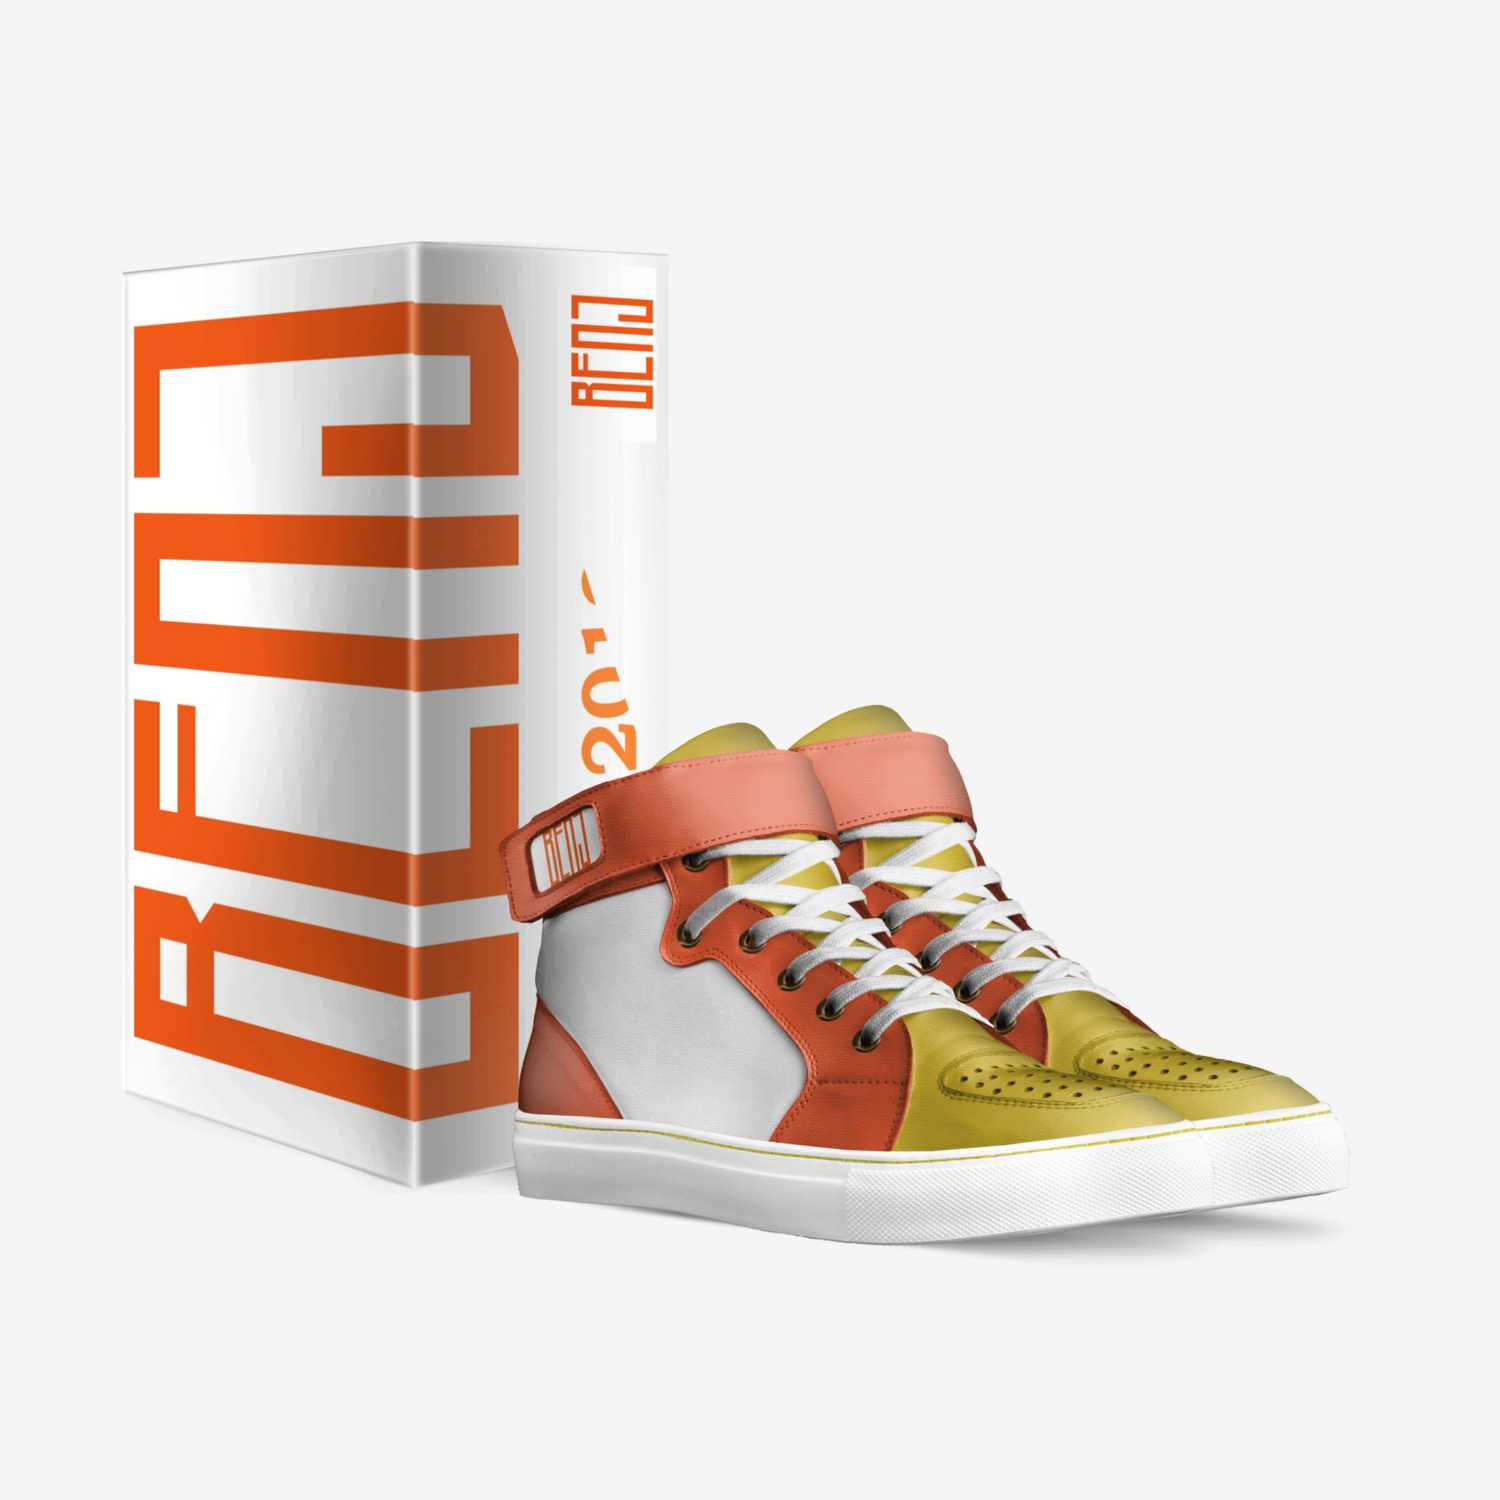 benj custom made in Italy shoes by BENJ-URBAN APPAREL. SINCE.2012 | Box view